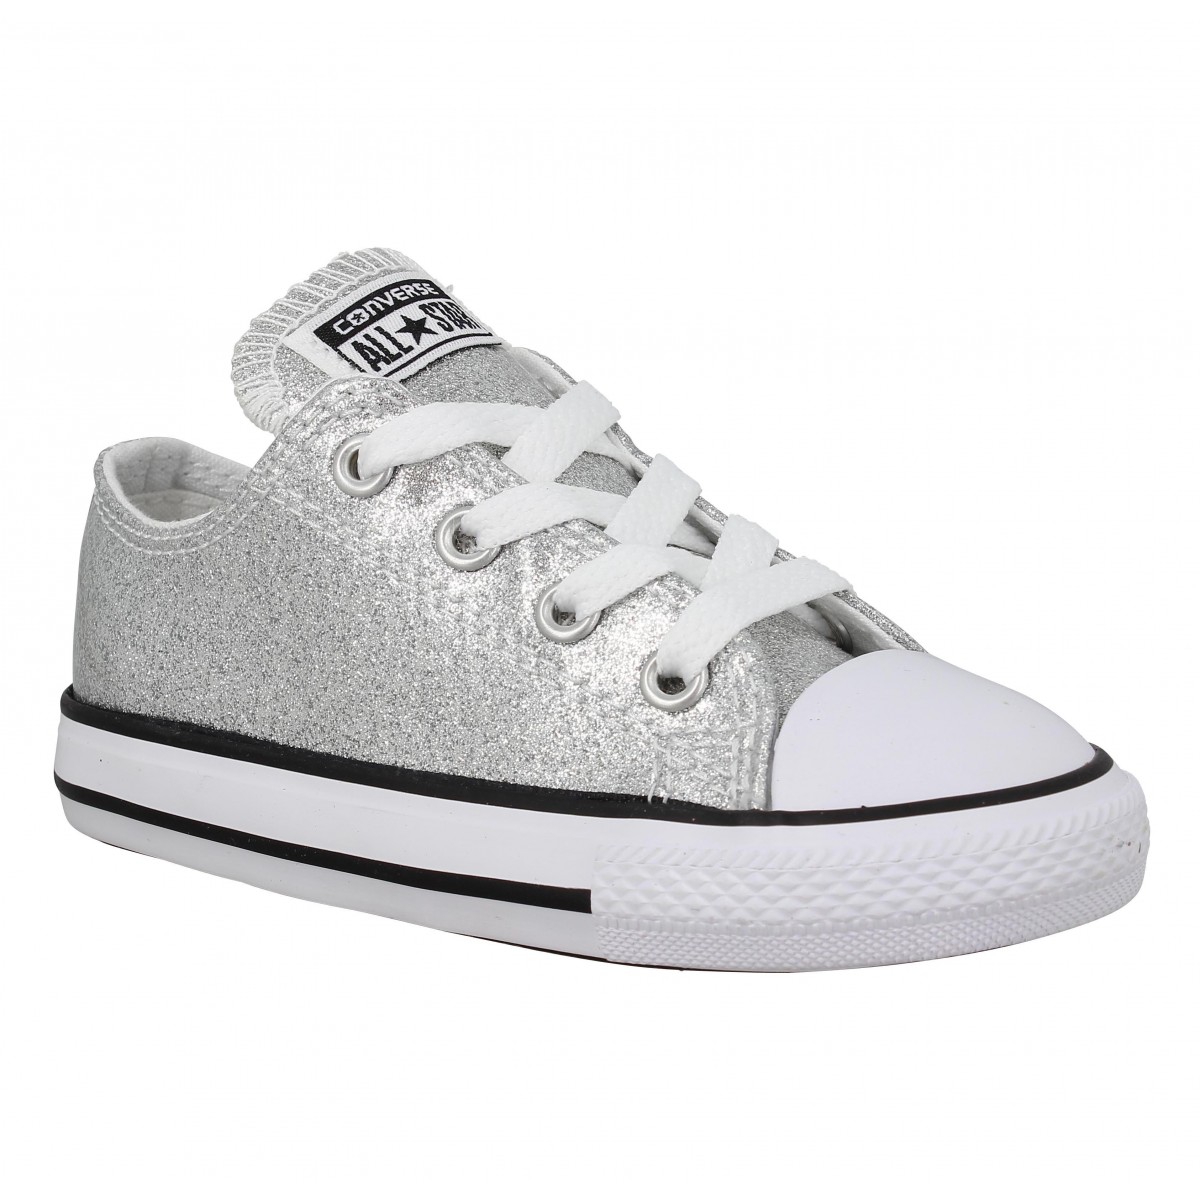 converse fille taille 24